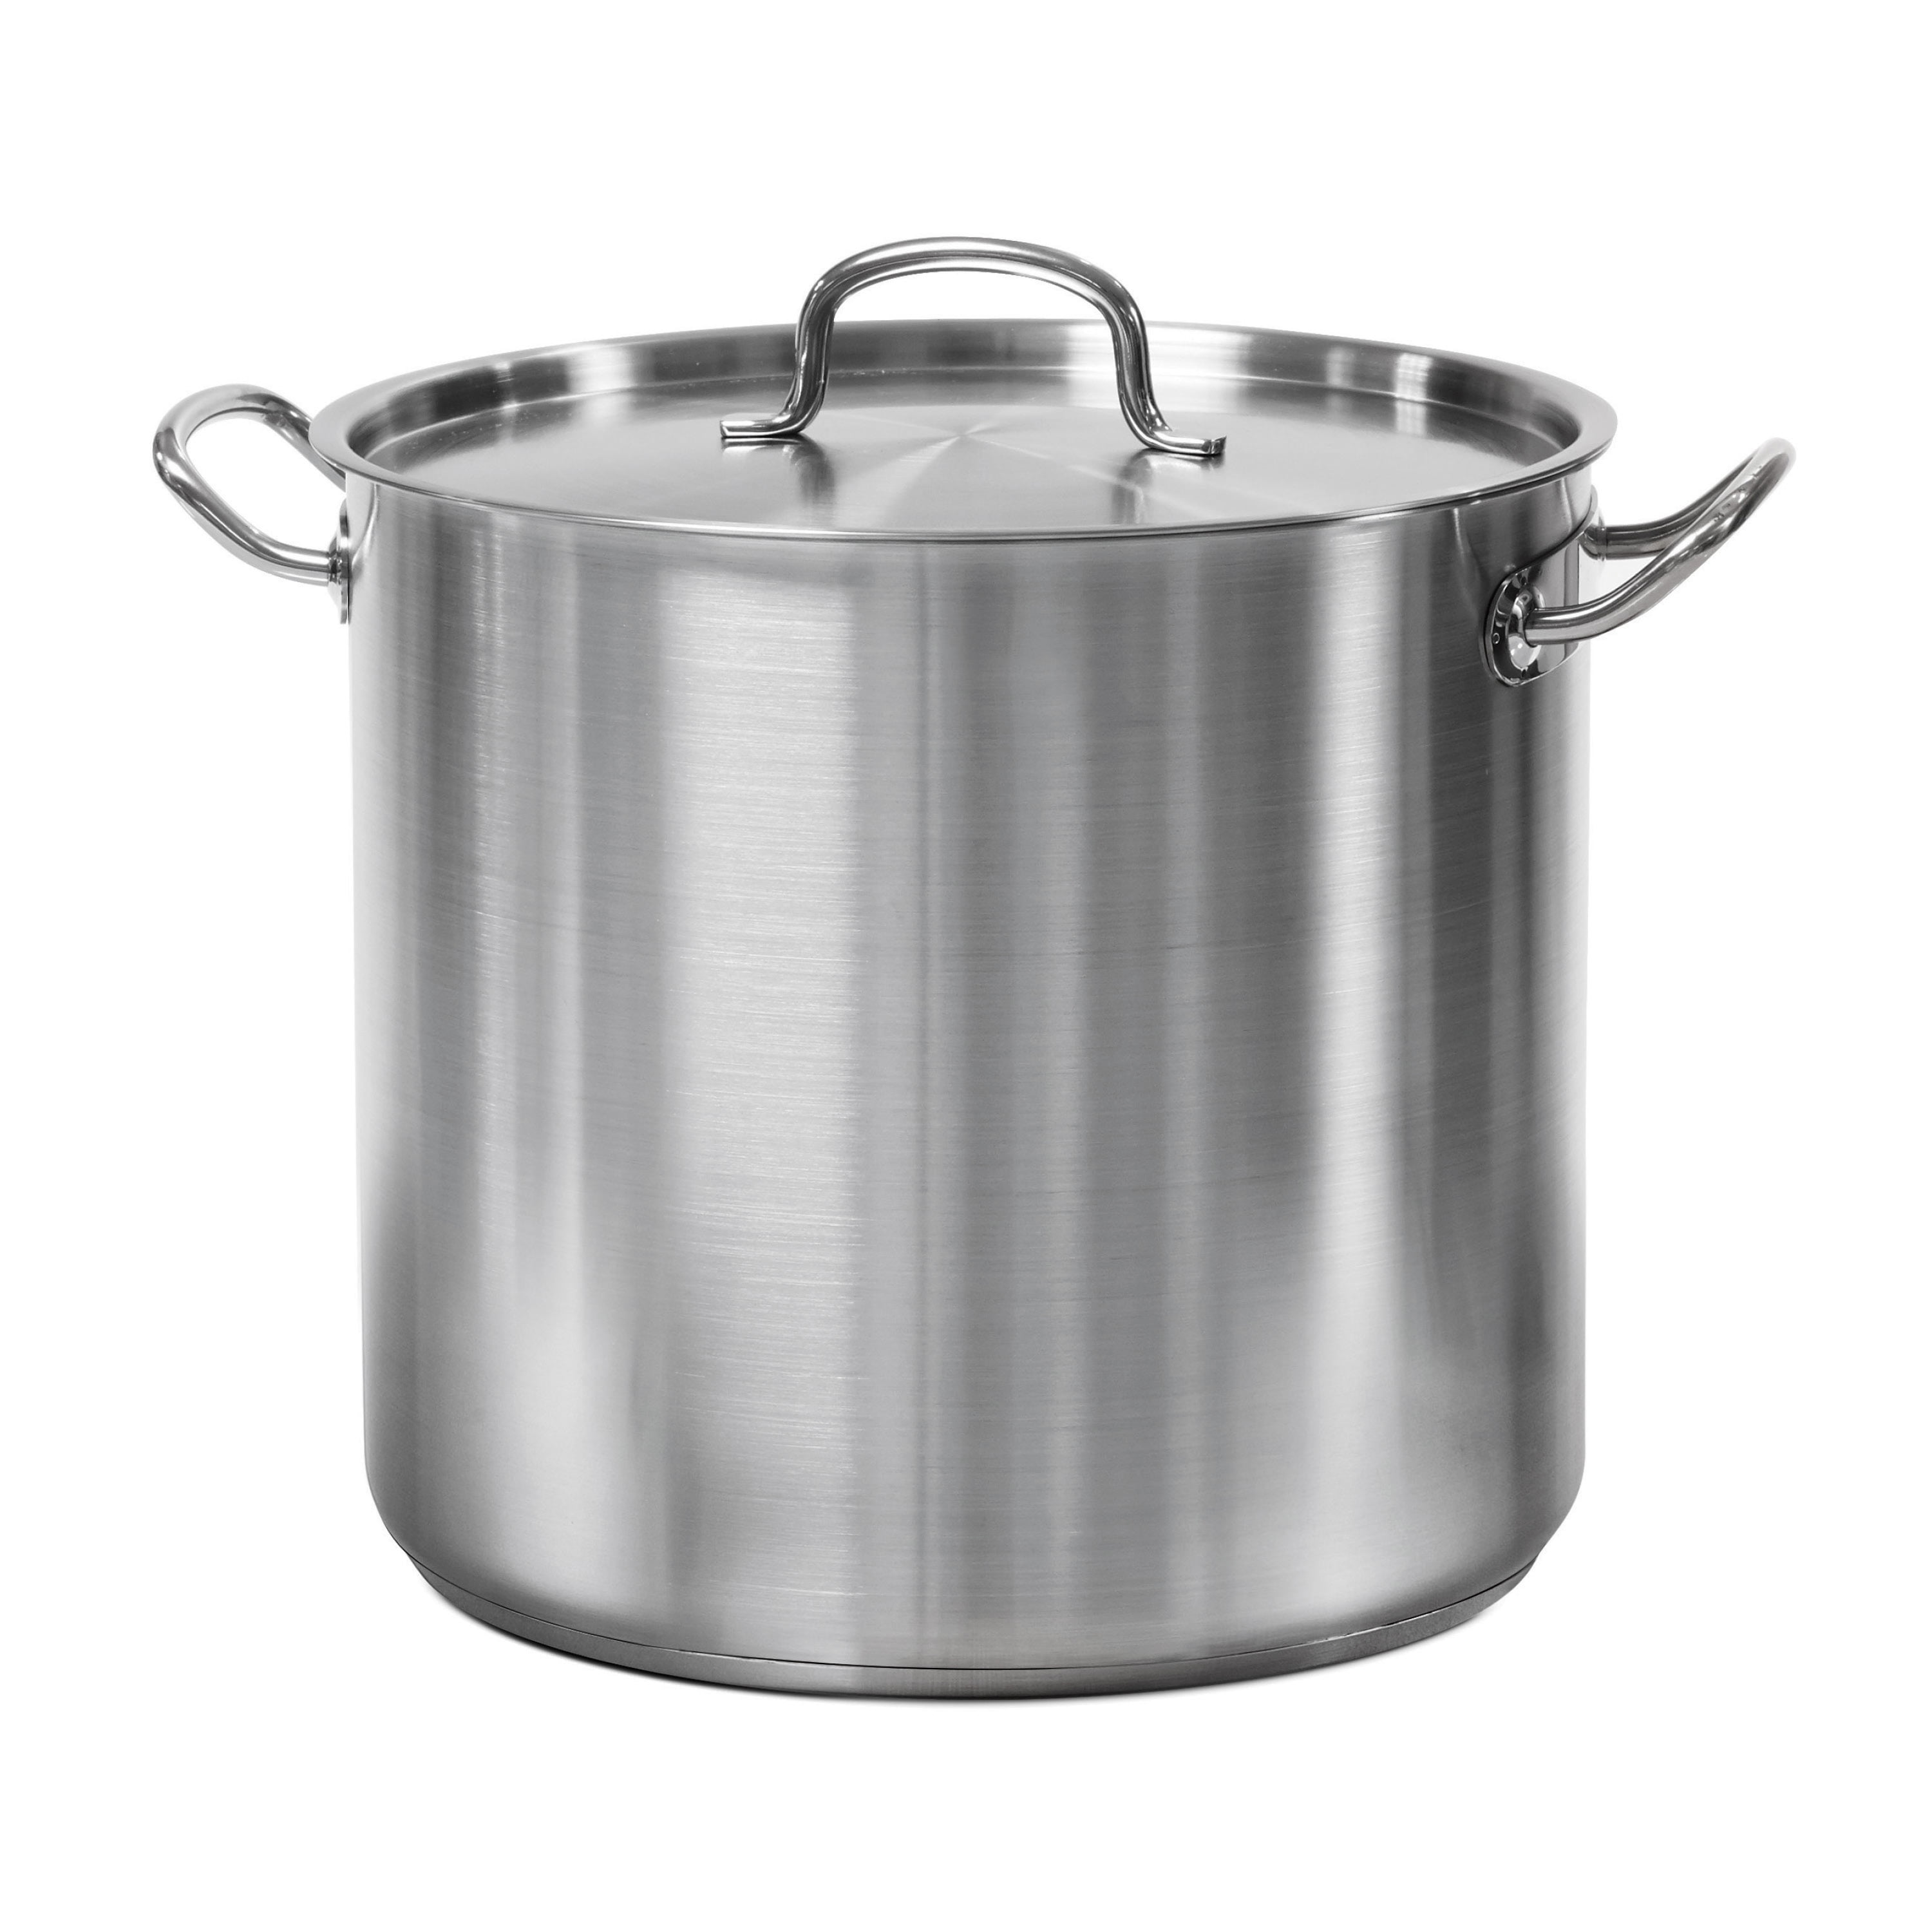 Tramontina Pro-Line 9 Qt. Stainless Steel Dutch Oven & Lid